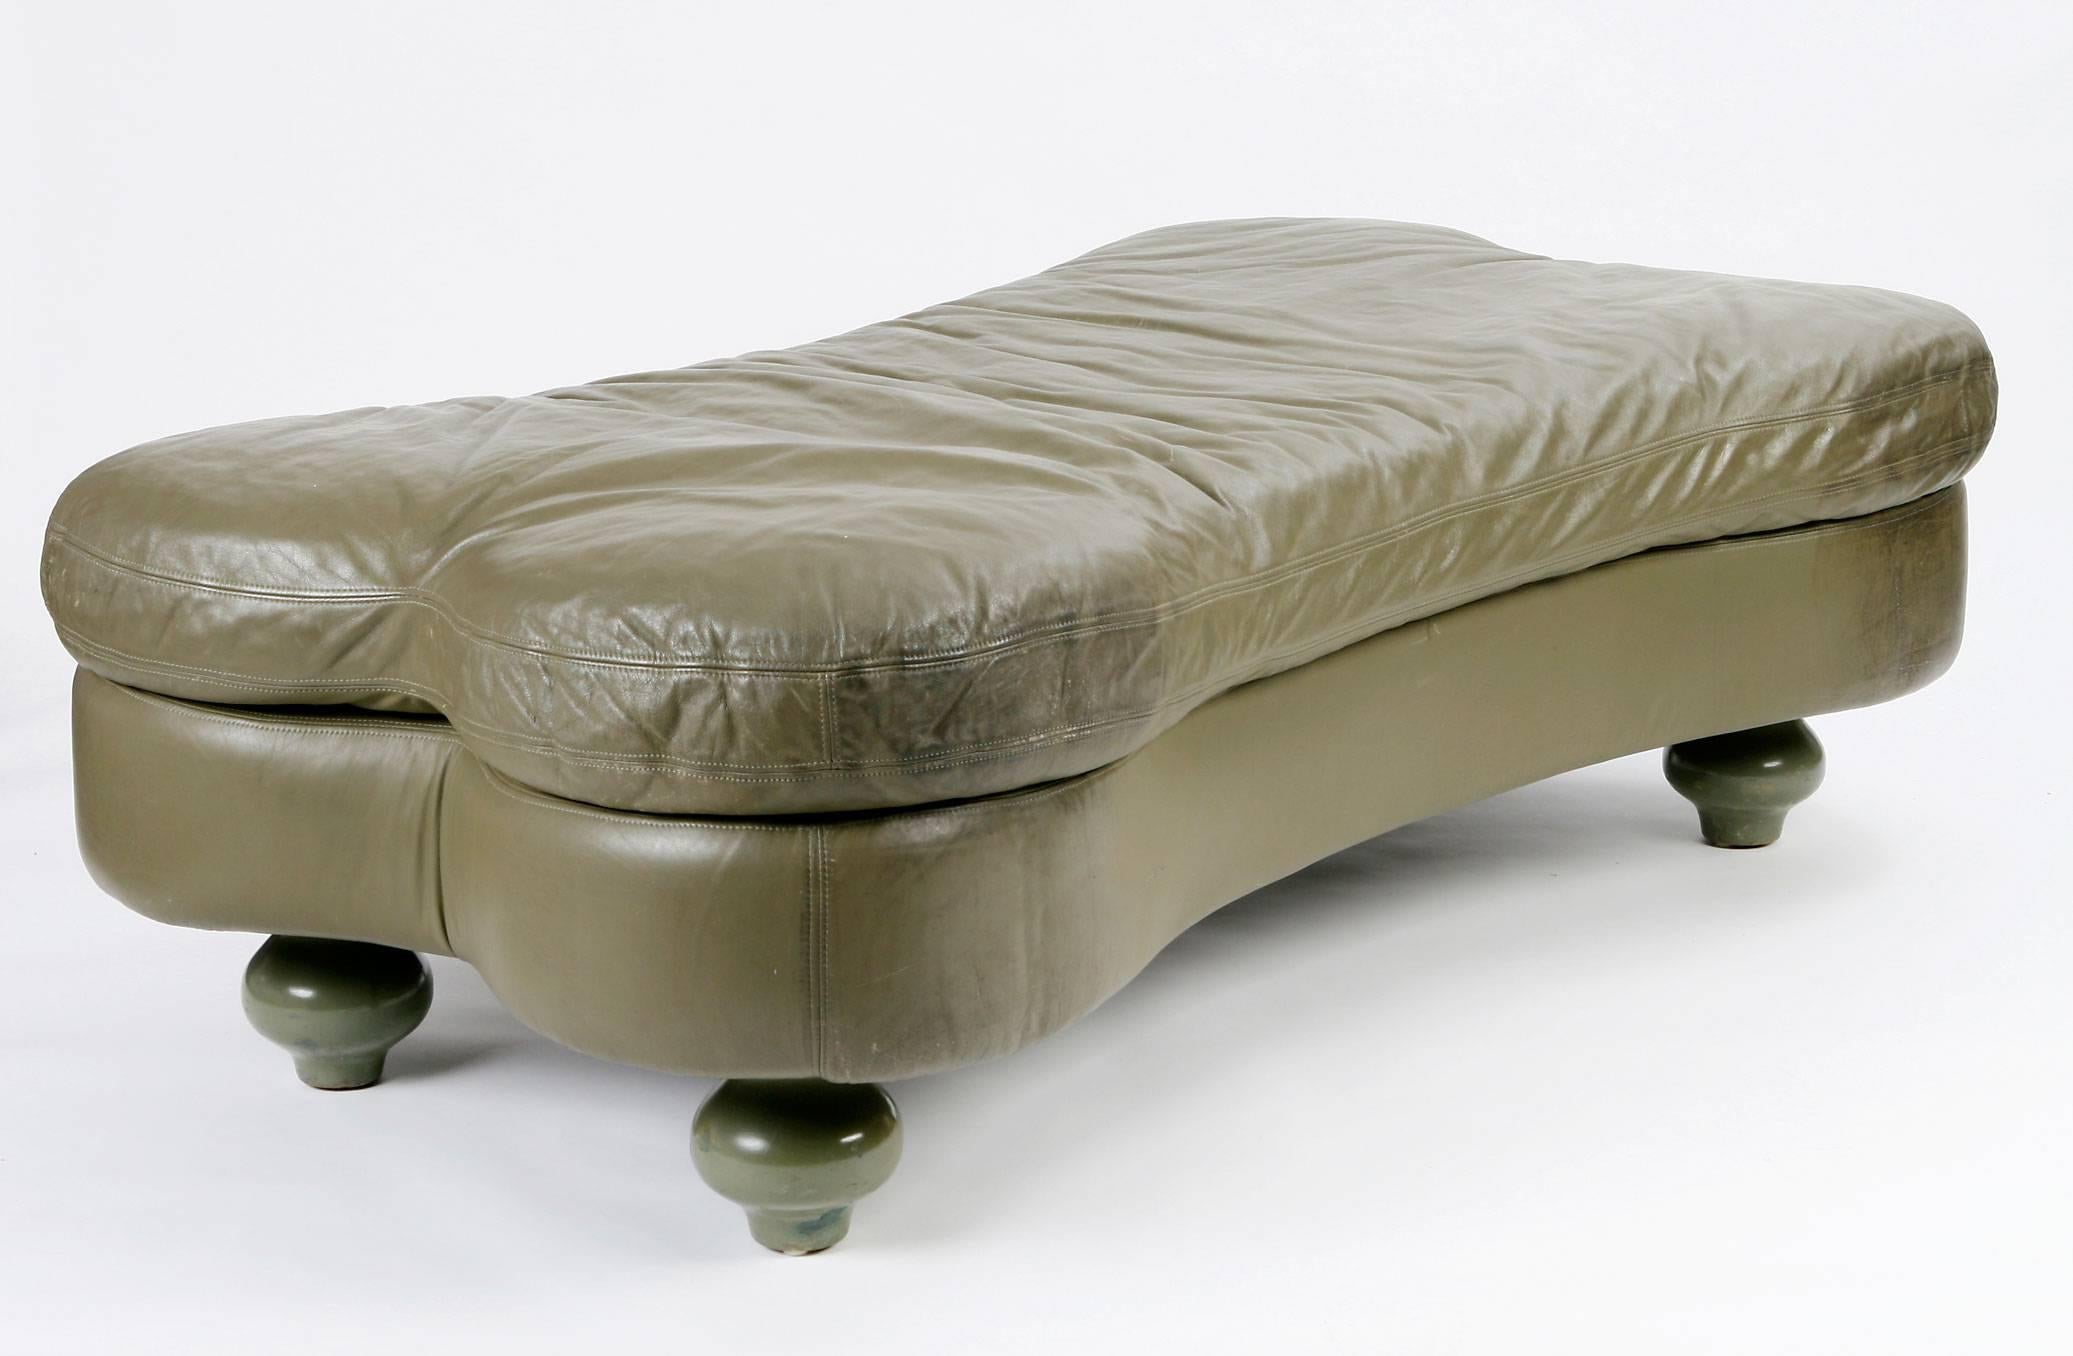 Bone-shaped daybed in olive leather raised on four lacquered turnip feet.